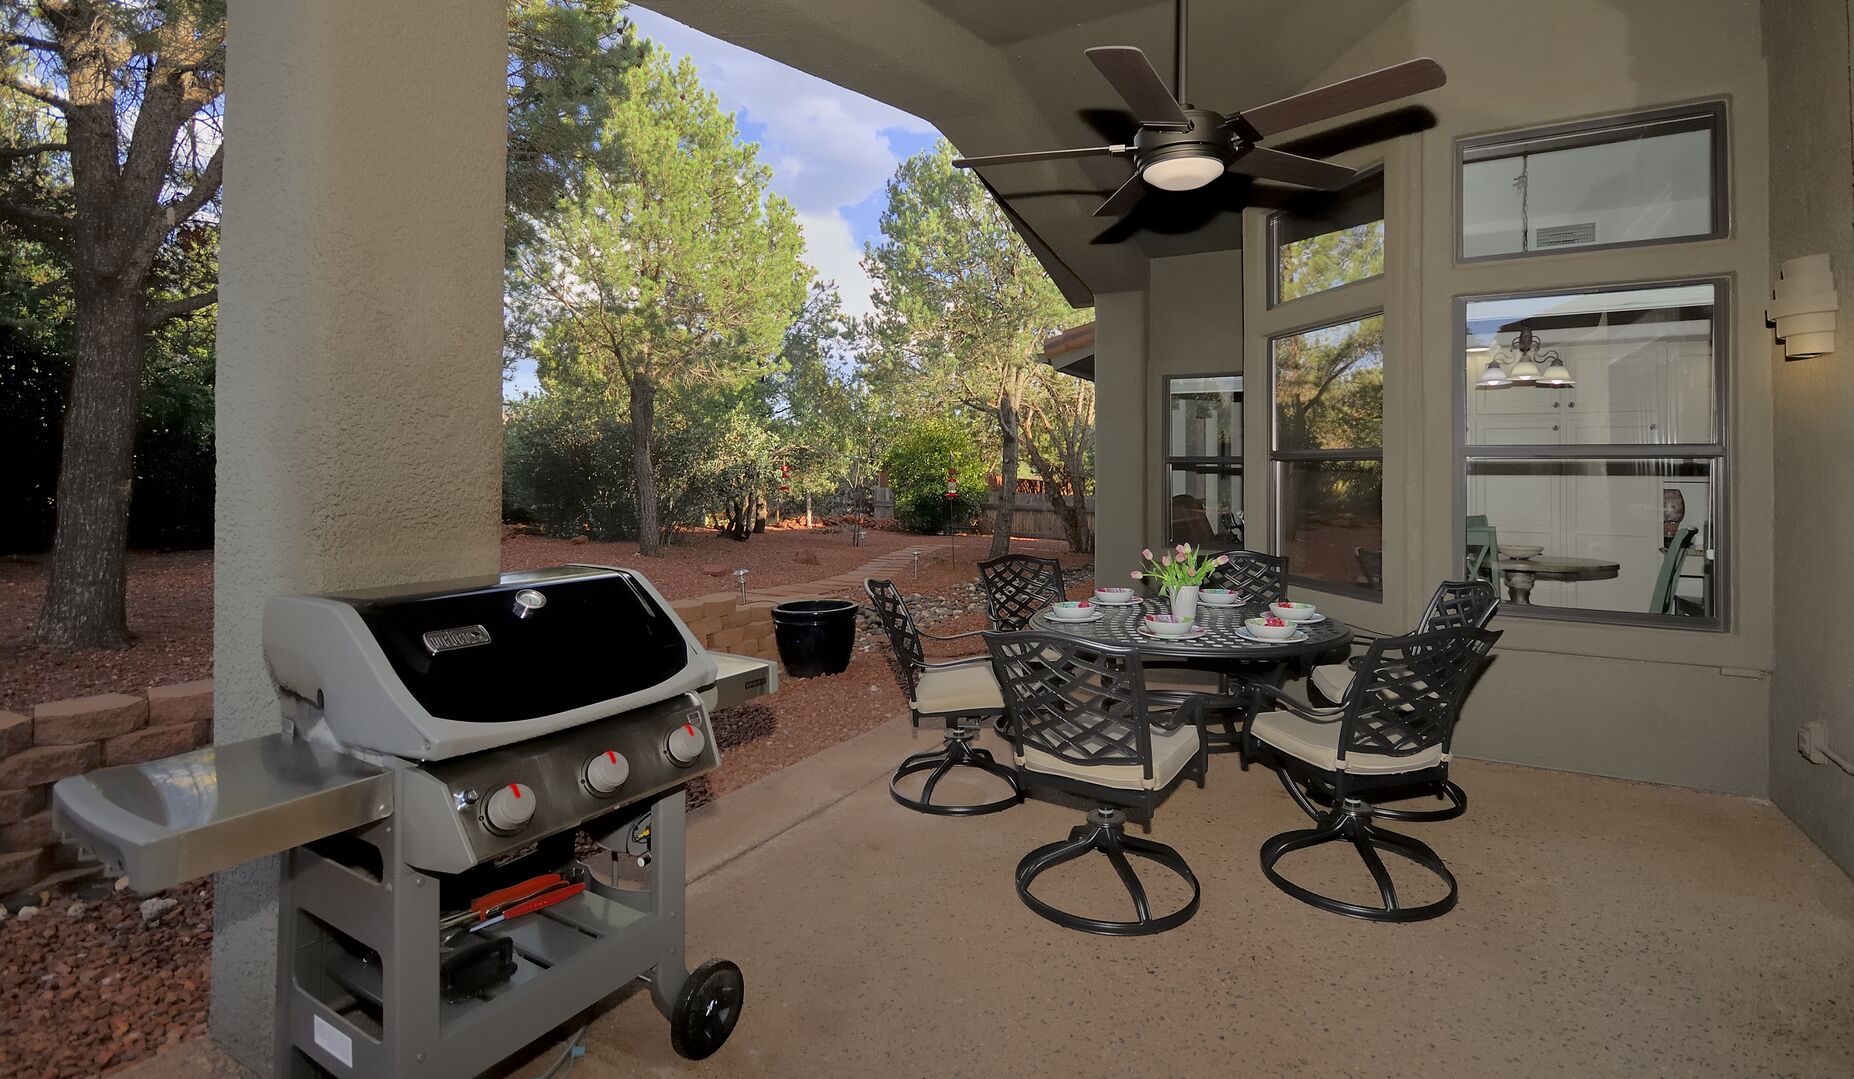 Covered outdoor dining and a gas grill